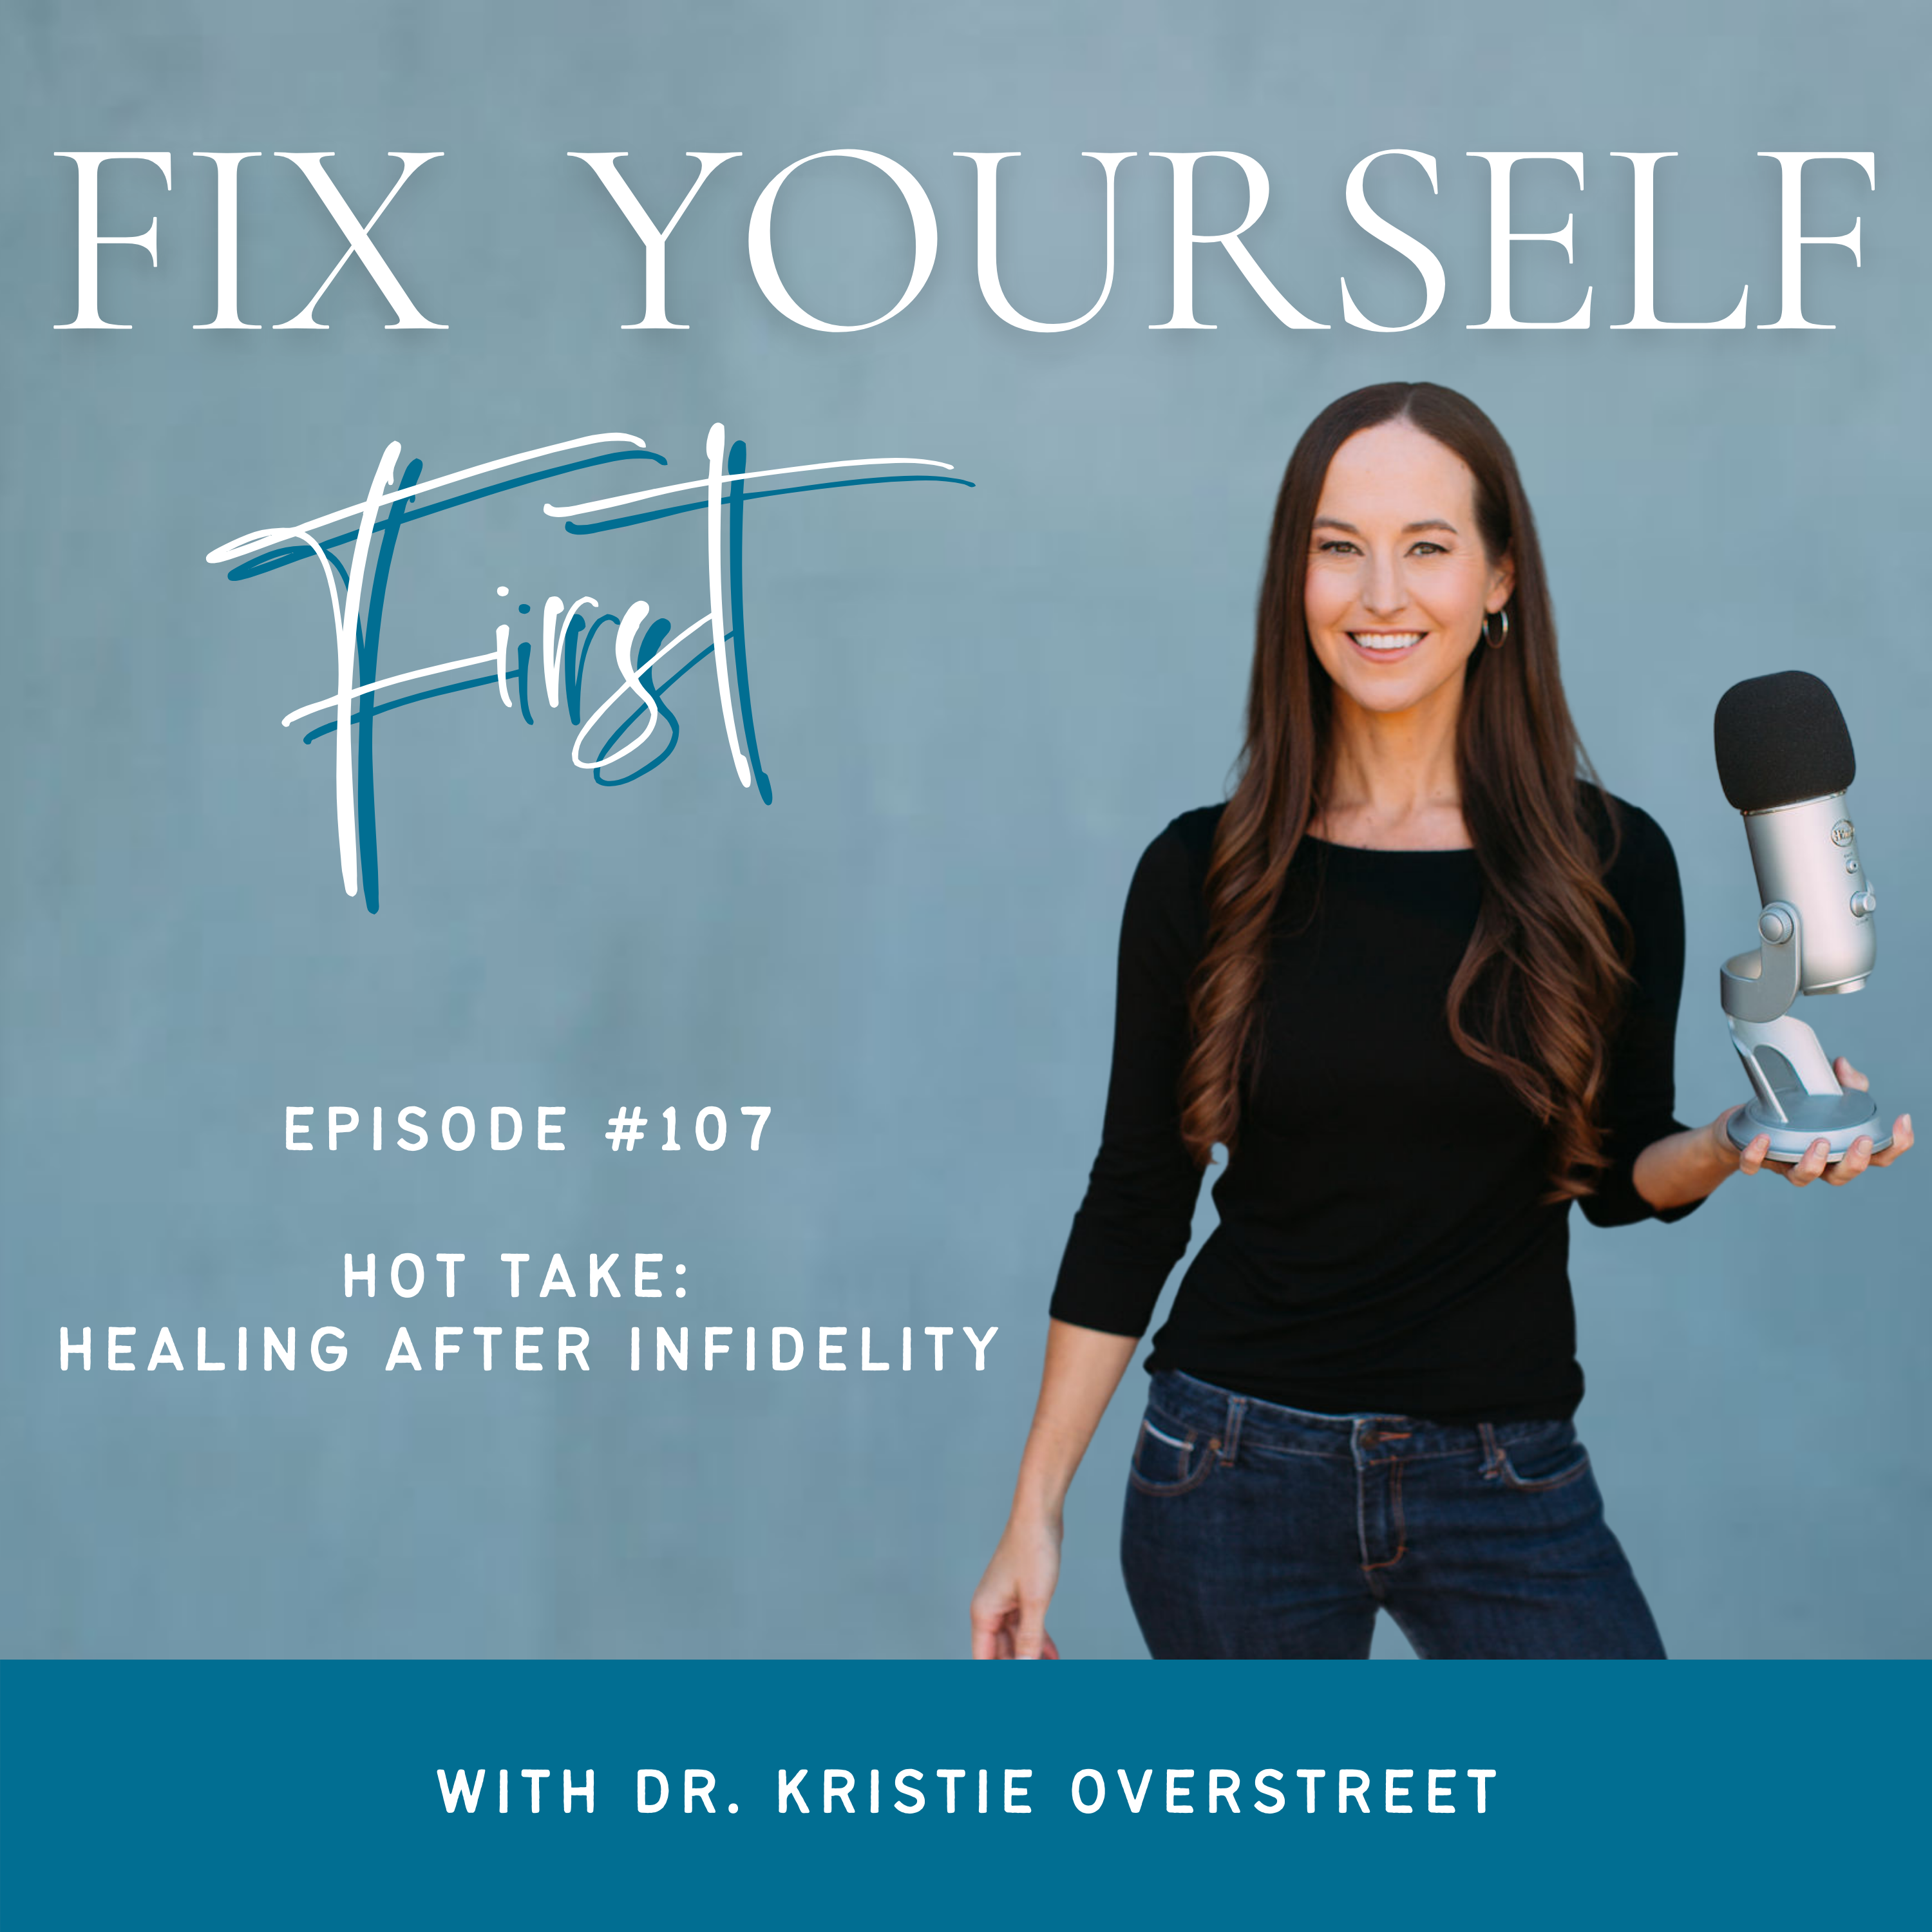 Fix Yourself First Episode 107 Hot Take: Healing After Infidelity